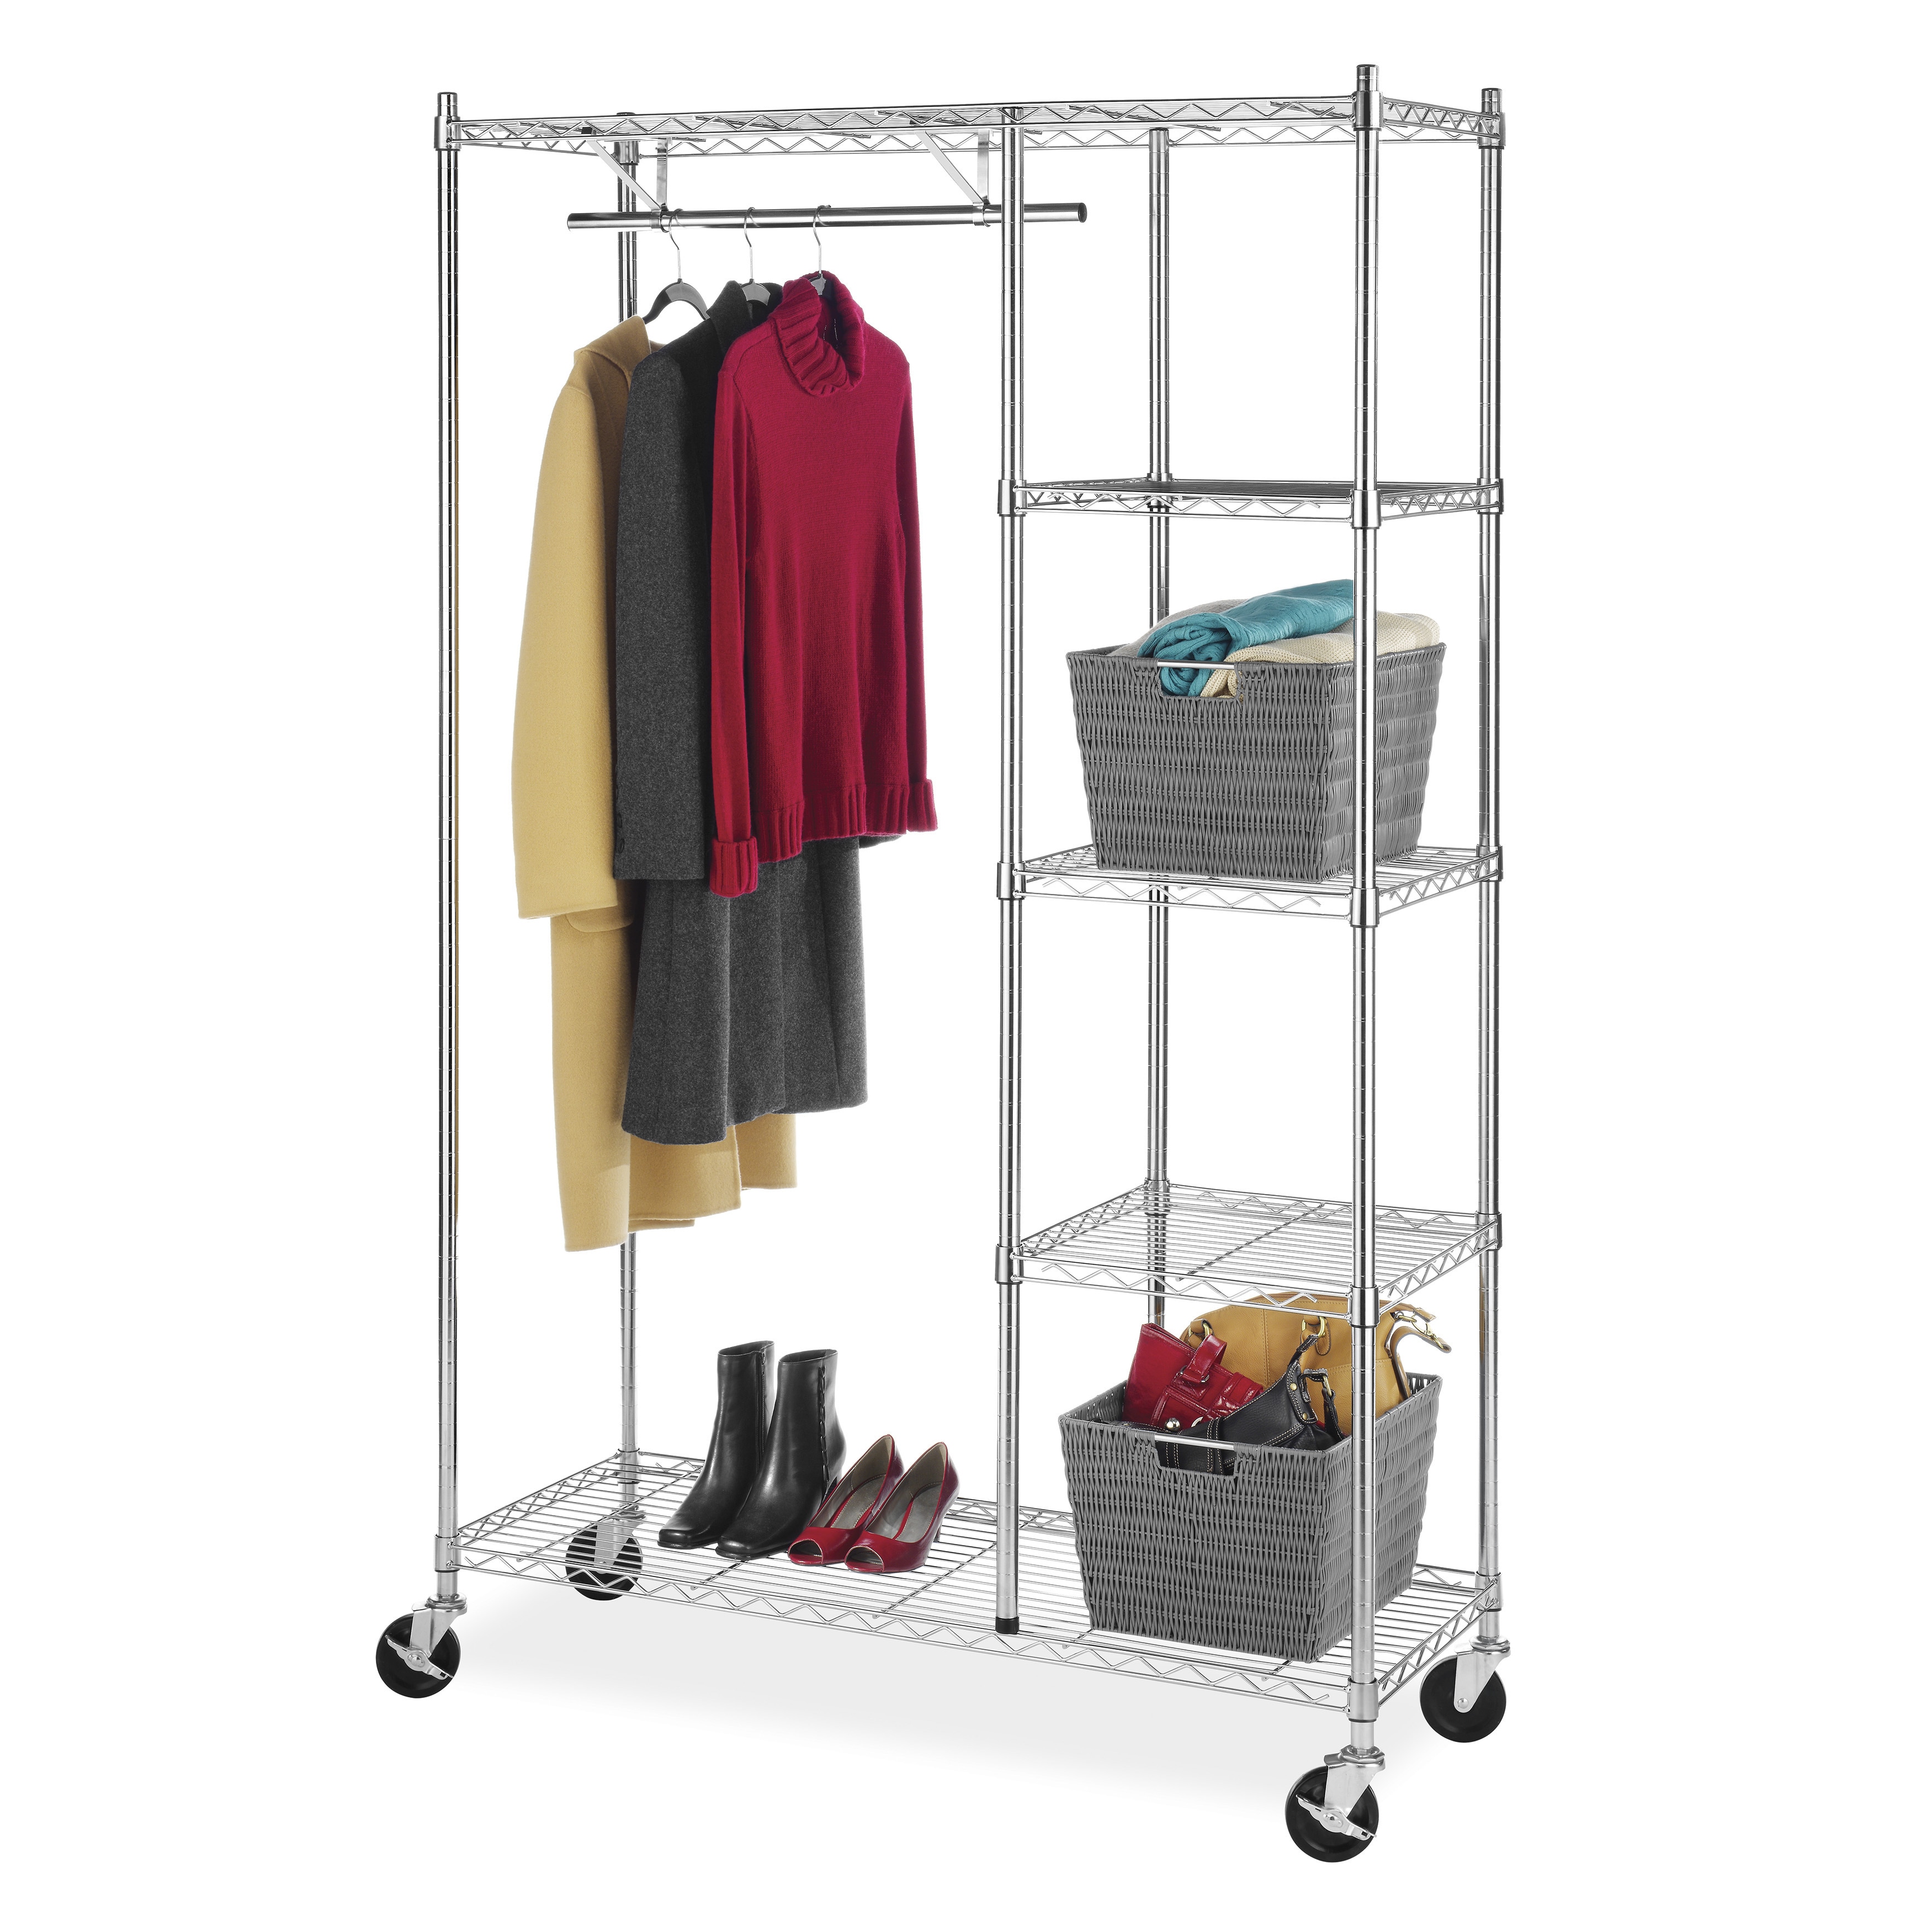 Whitmor Chrome 4 shelf Rolling Garment Rack (ChromeMaterials Chrome steelQuantity One (1)Dimensions 77 inches high x 49.90 inches wide x 19.75 inches deepDurable chromed steel constructionTwo of the four heavy duty wheels feature a locking optionAssemb